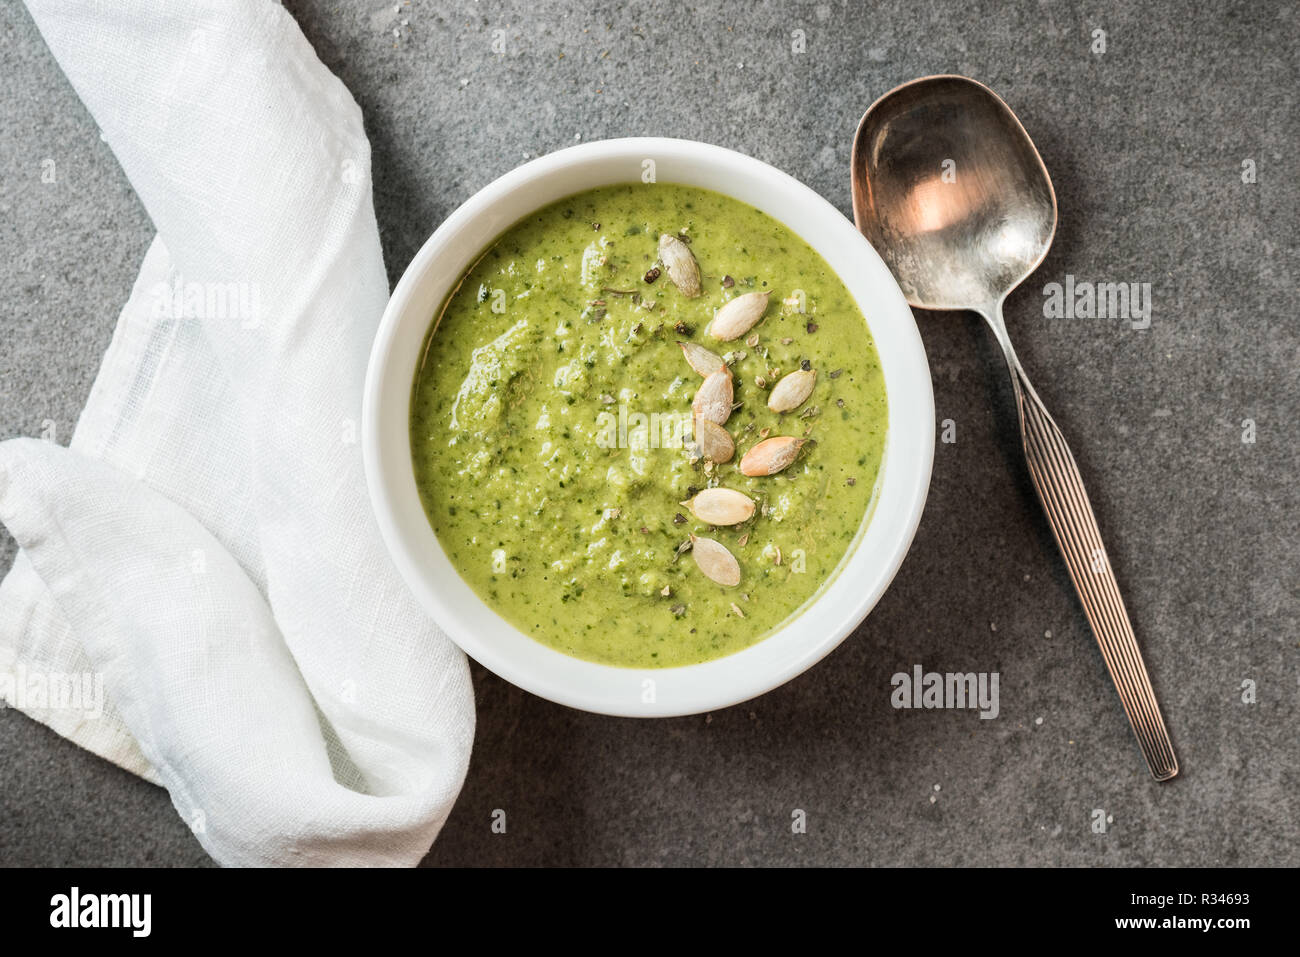 Top view of silver spoon, white cloth and homemade green creamy soup in bowl Stock Photo